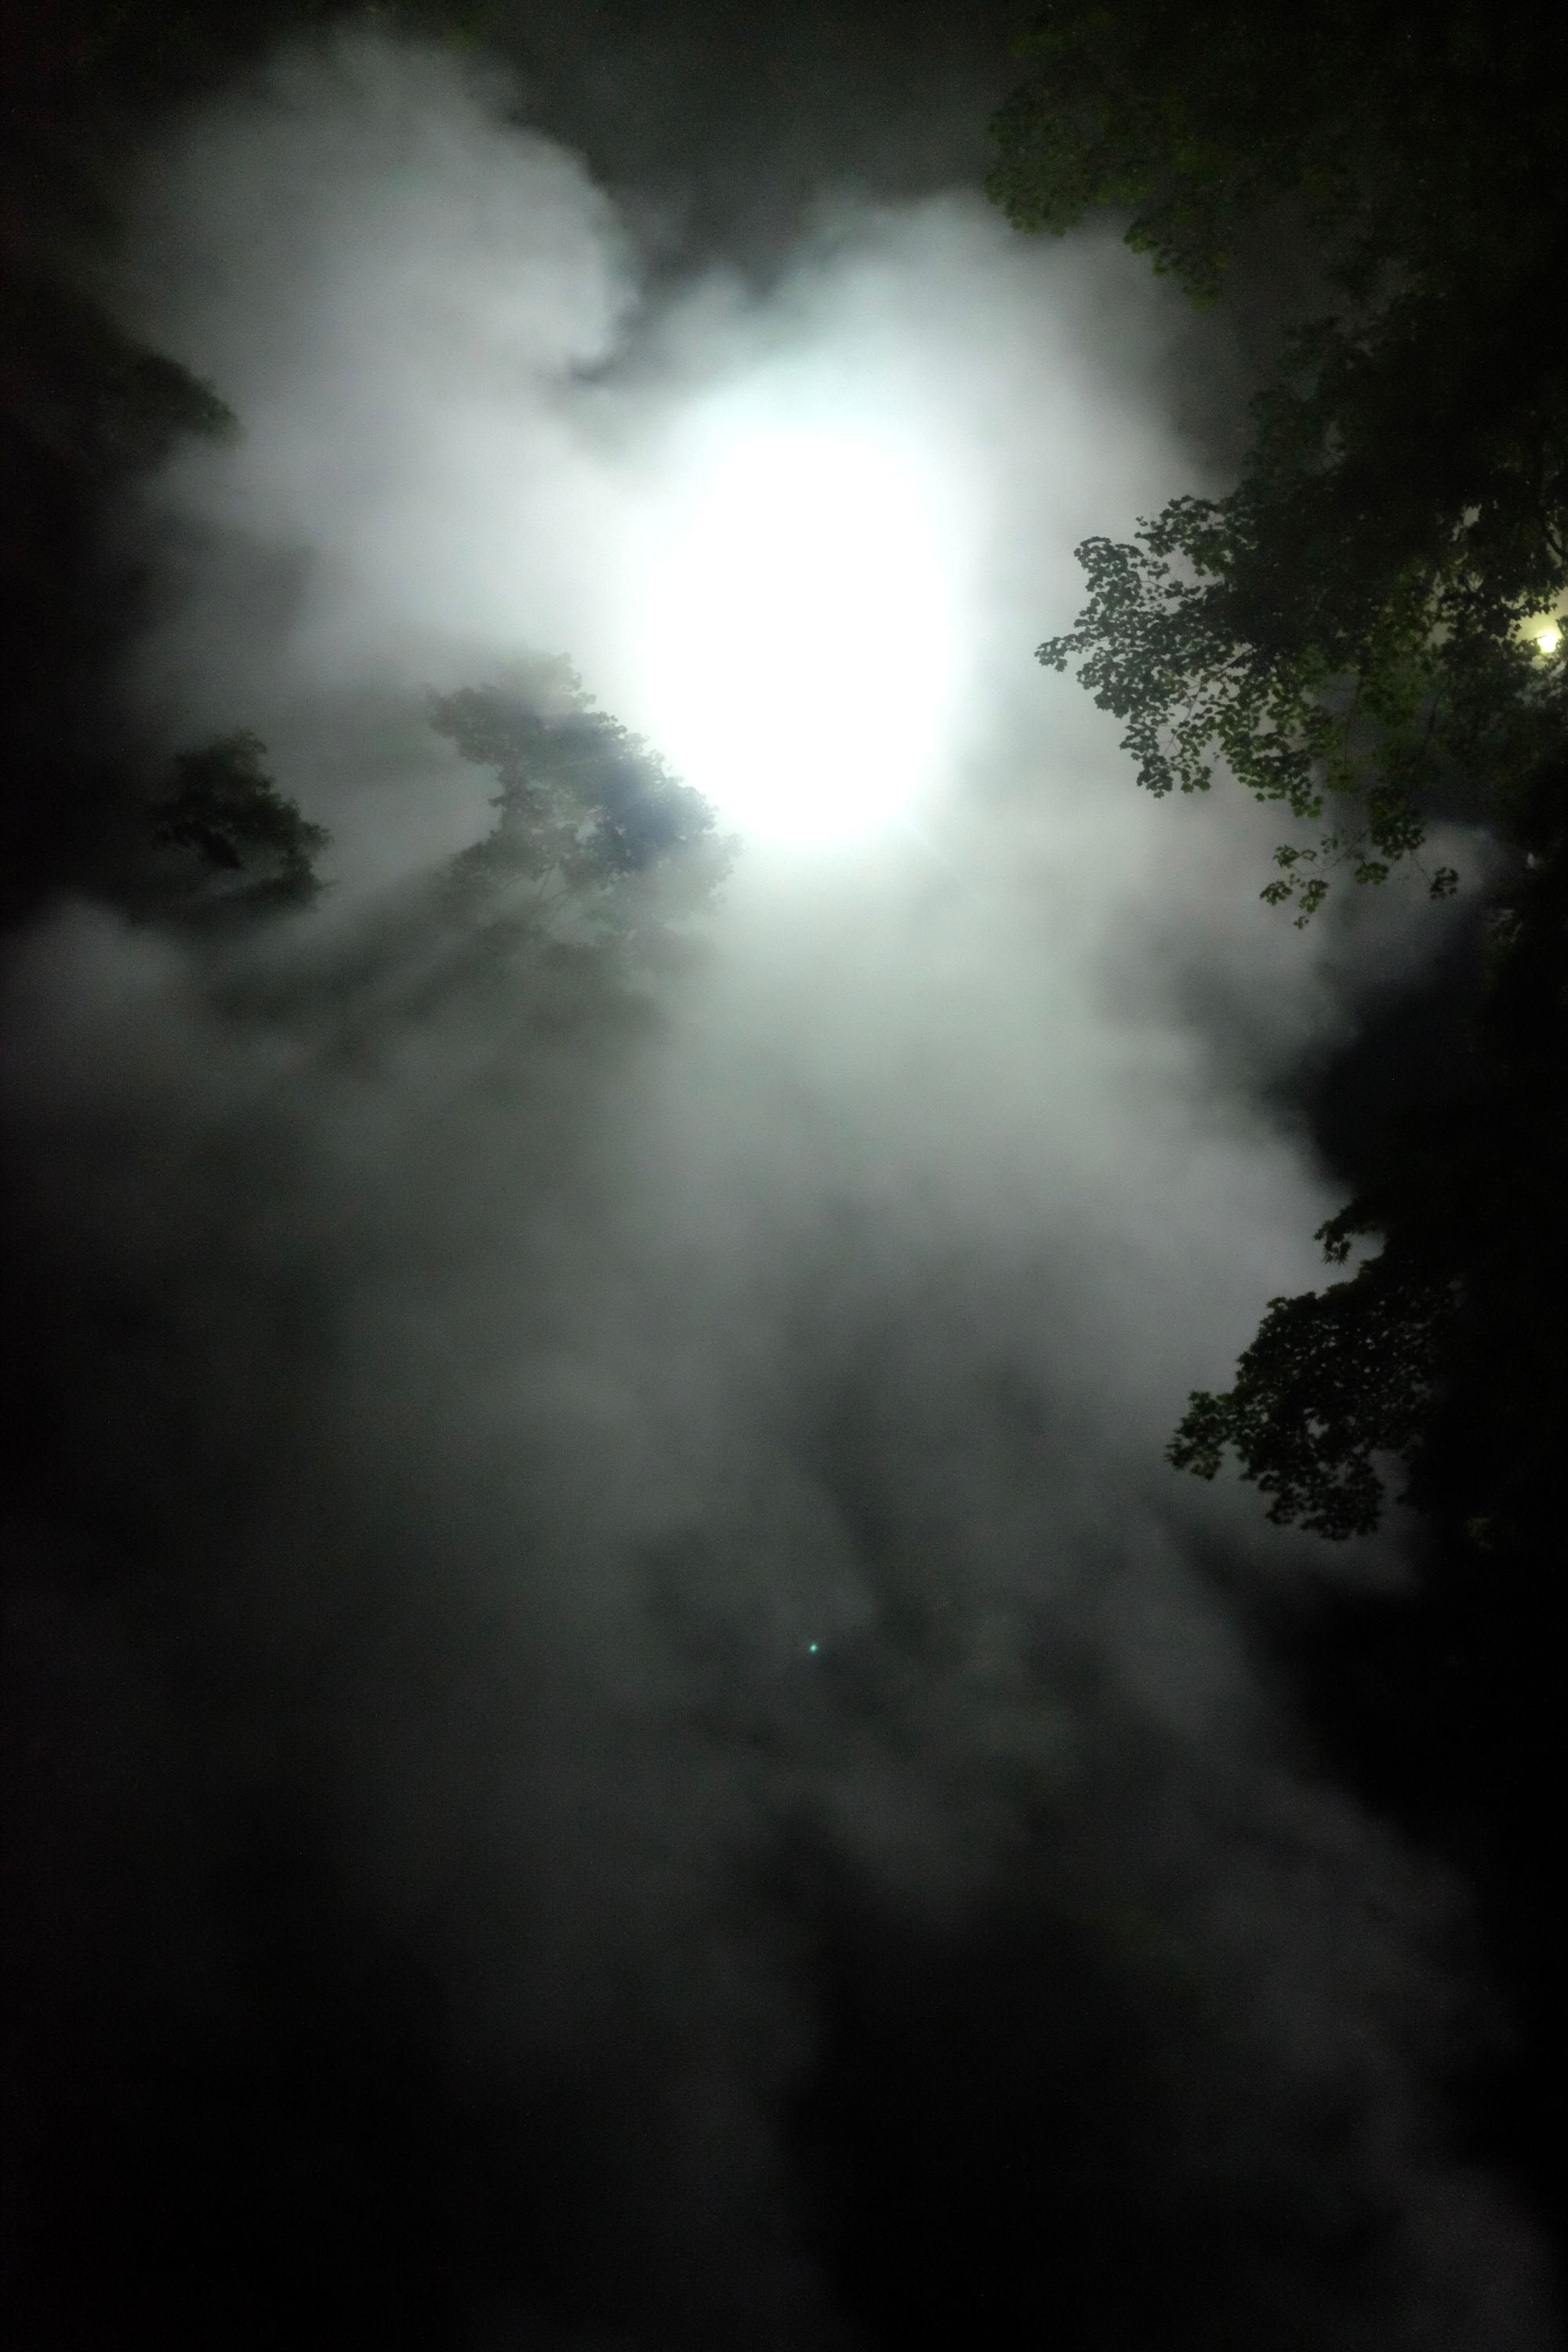 Looking up at the sky, the Moon lights up clouds of steam in a forest.